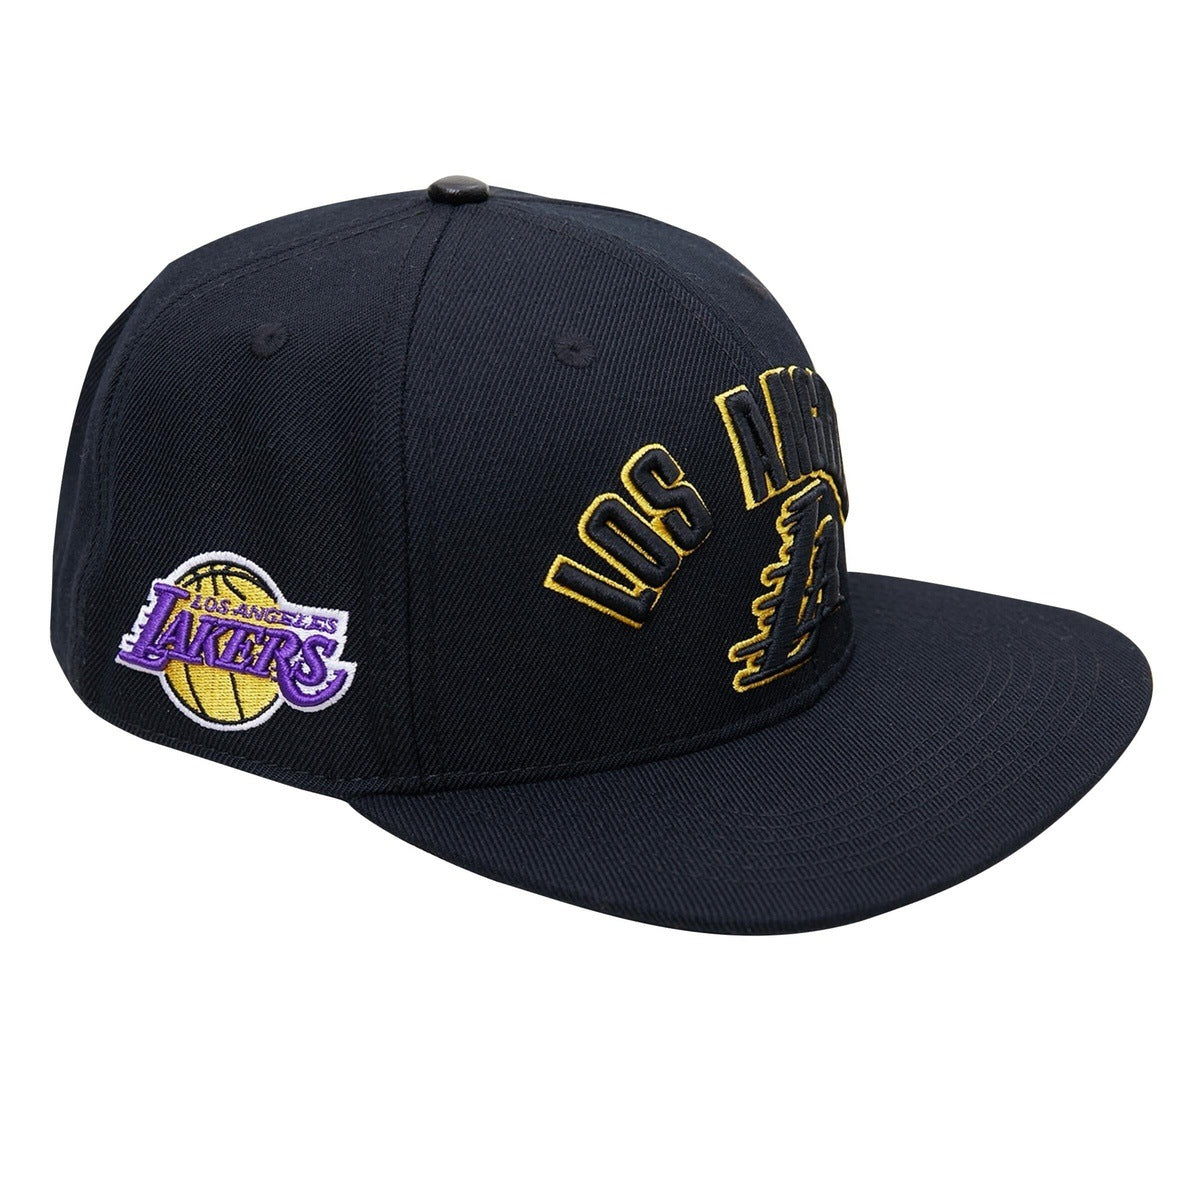 LOS ANGELES LAKERS STACKED LOGO WOOL SNAPBACK HAT (YELLOW)